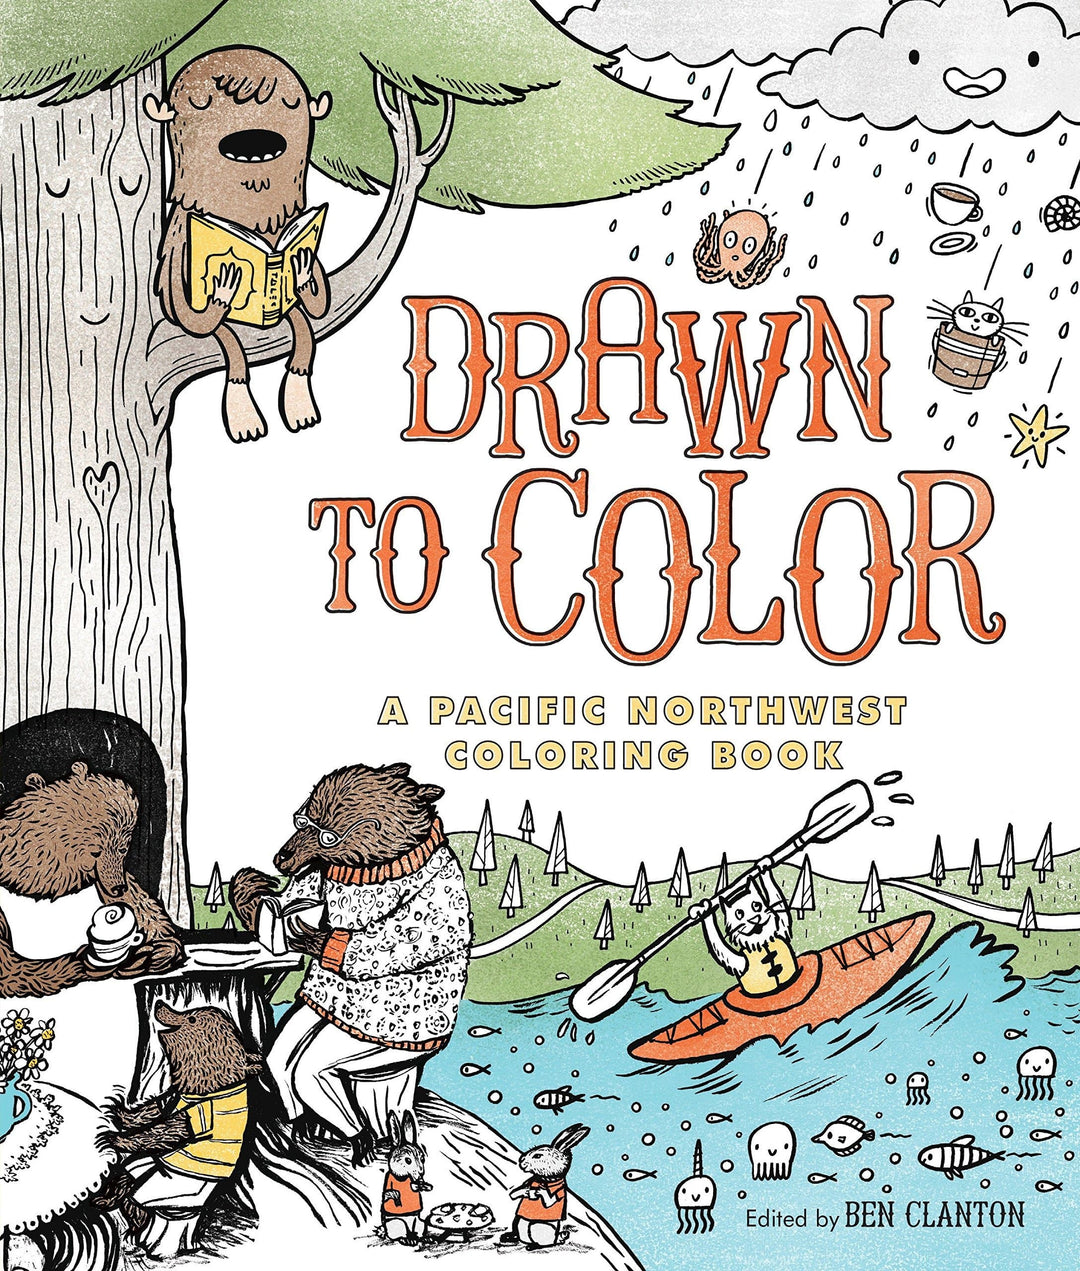 Penguin Random House Book Drawn to Color: A Pacific Northwest Coloring Book